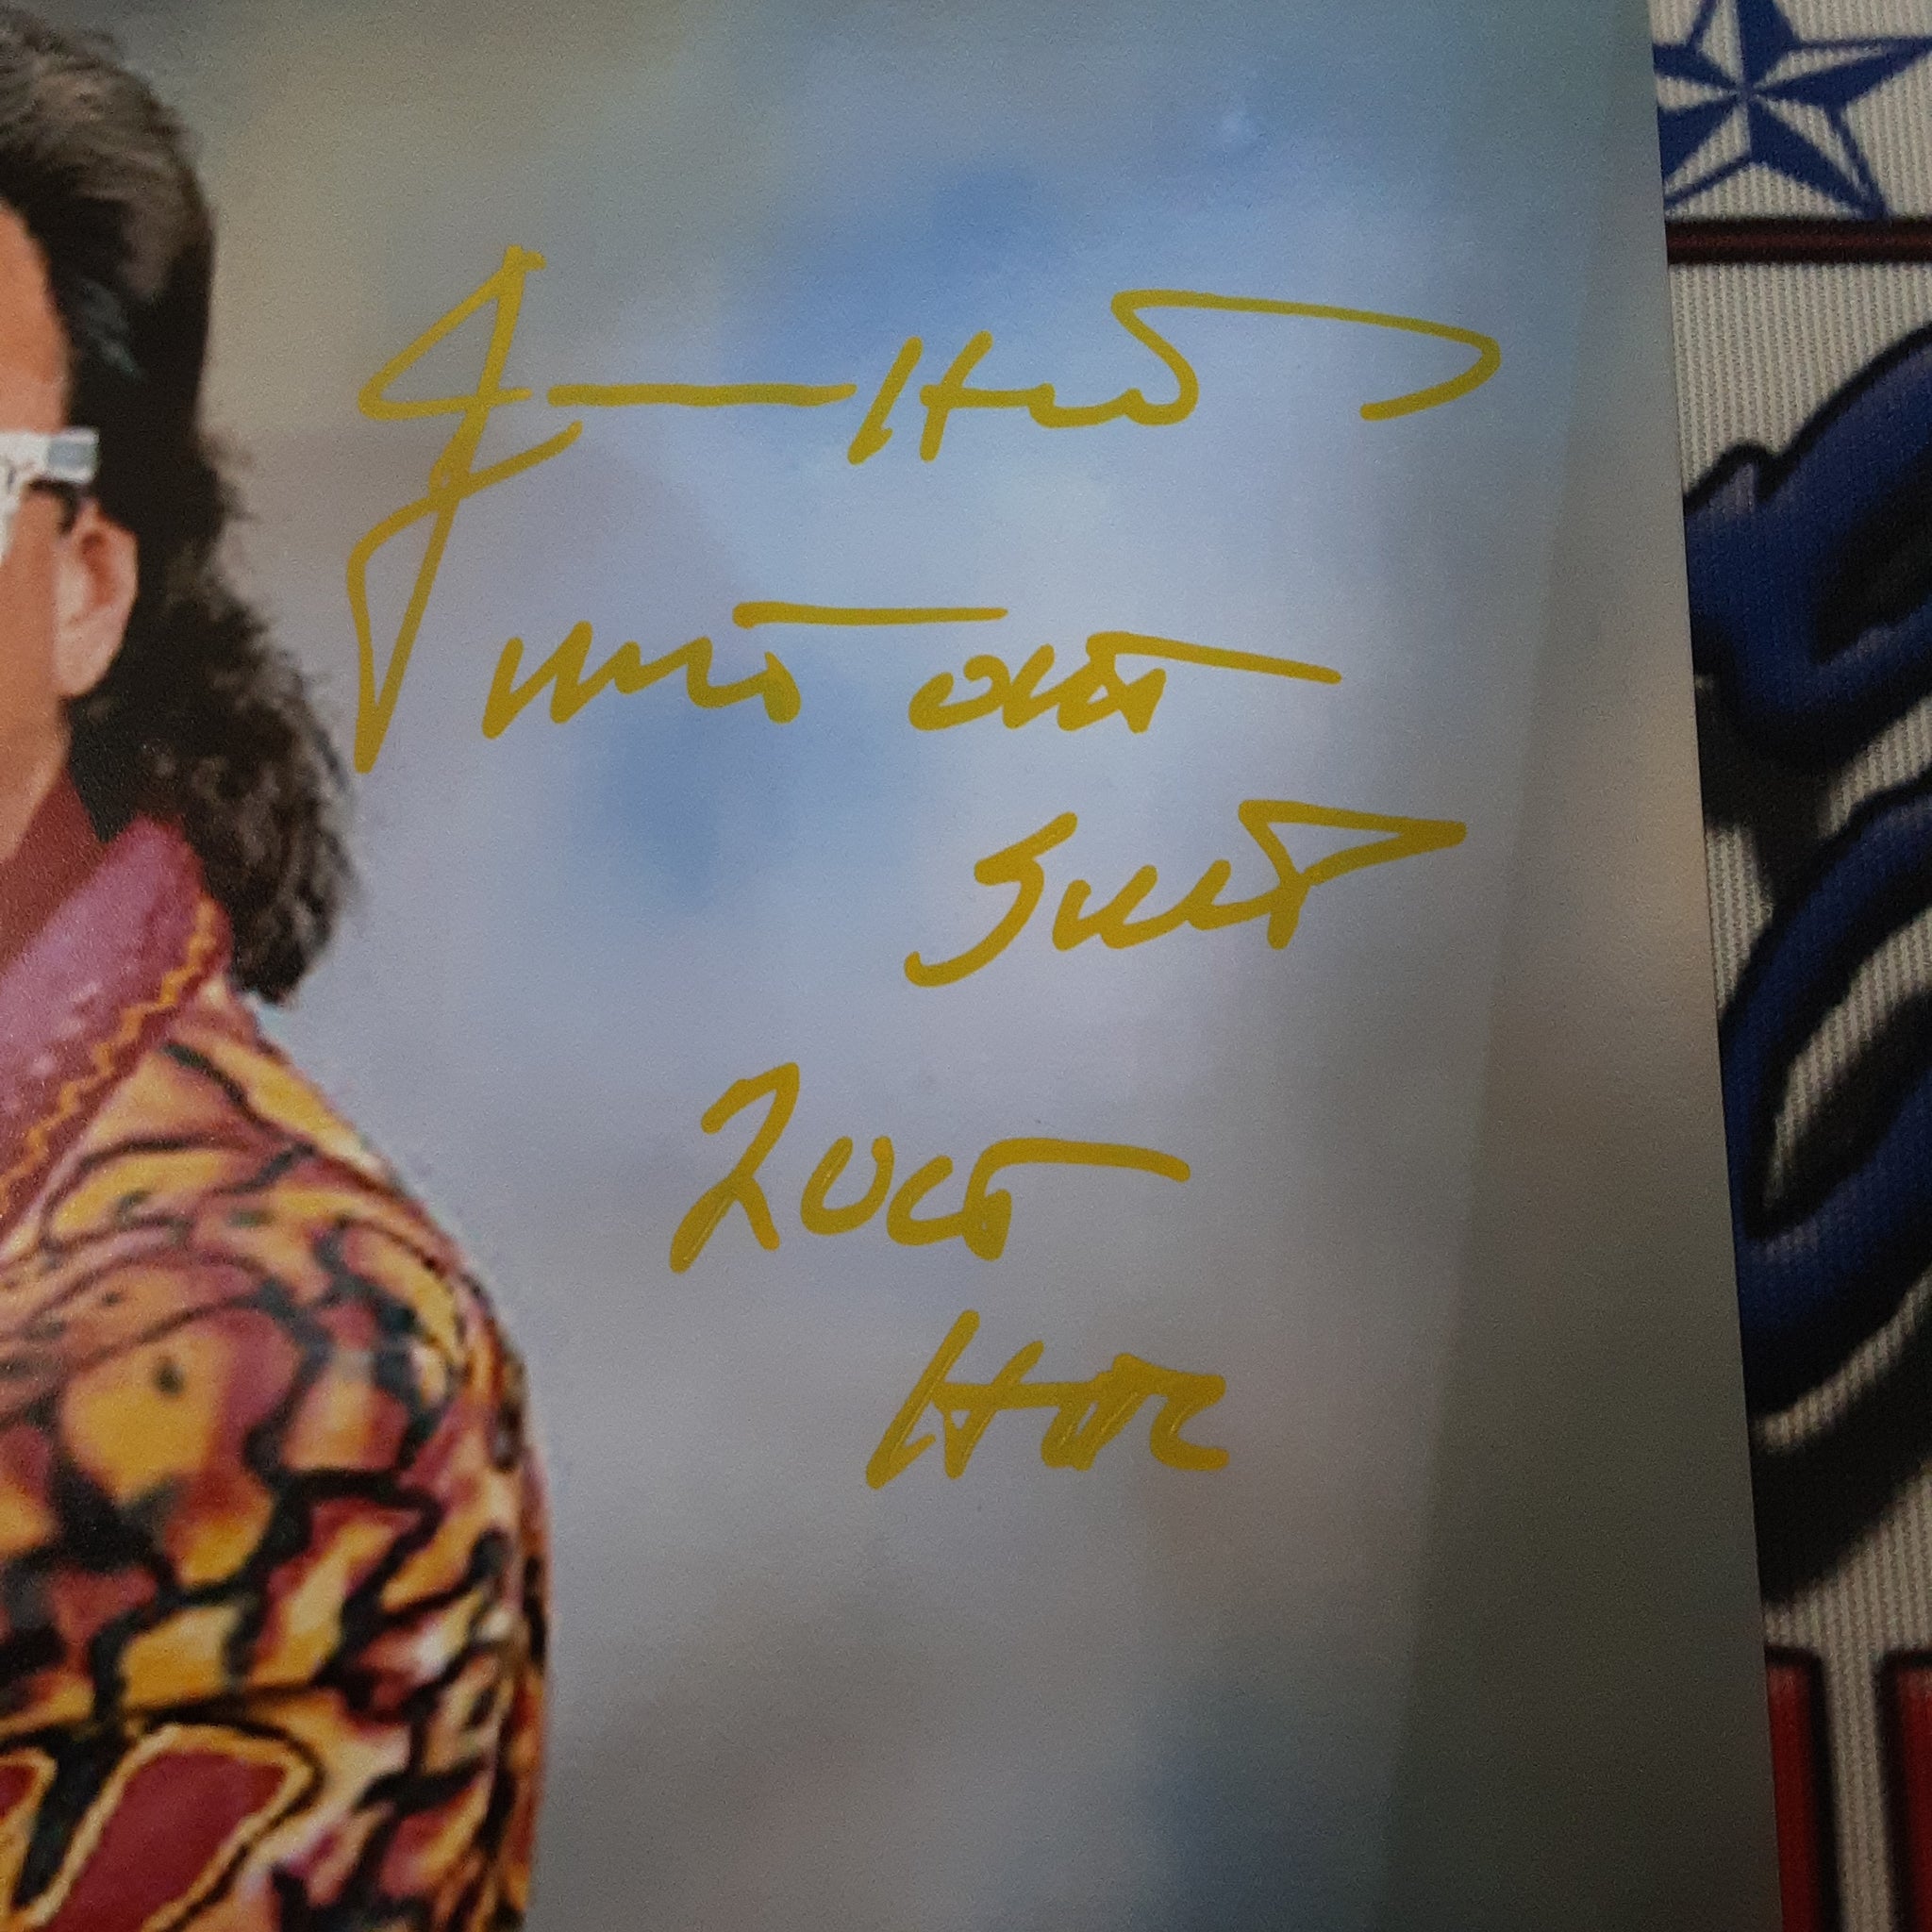 Jimmy Hart Authentic Signed 8x10 Photo Autographed with Inscription JSA.